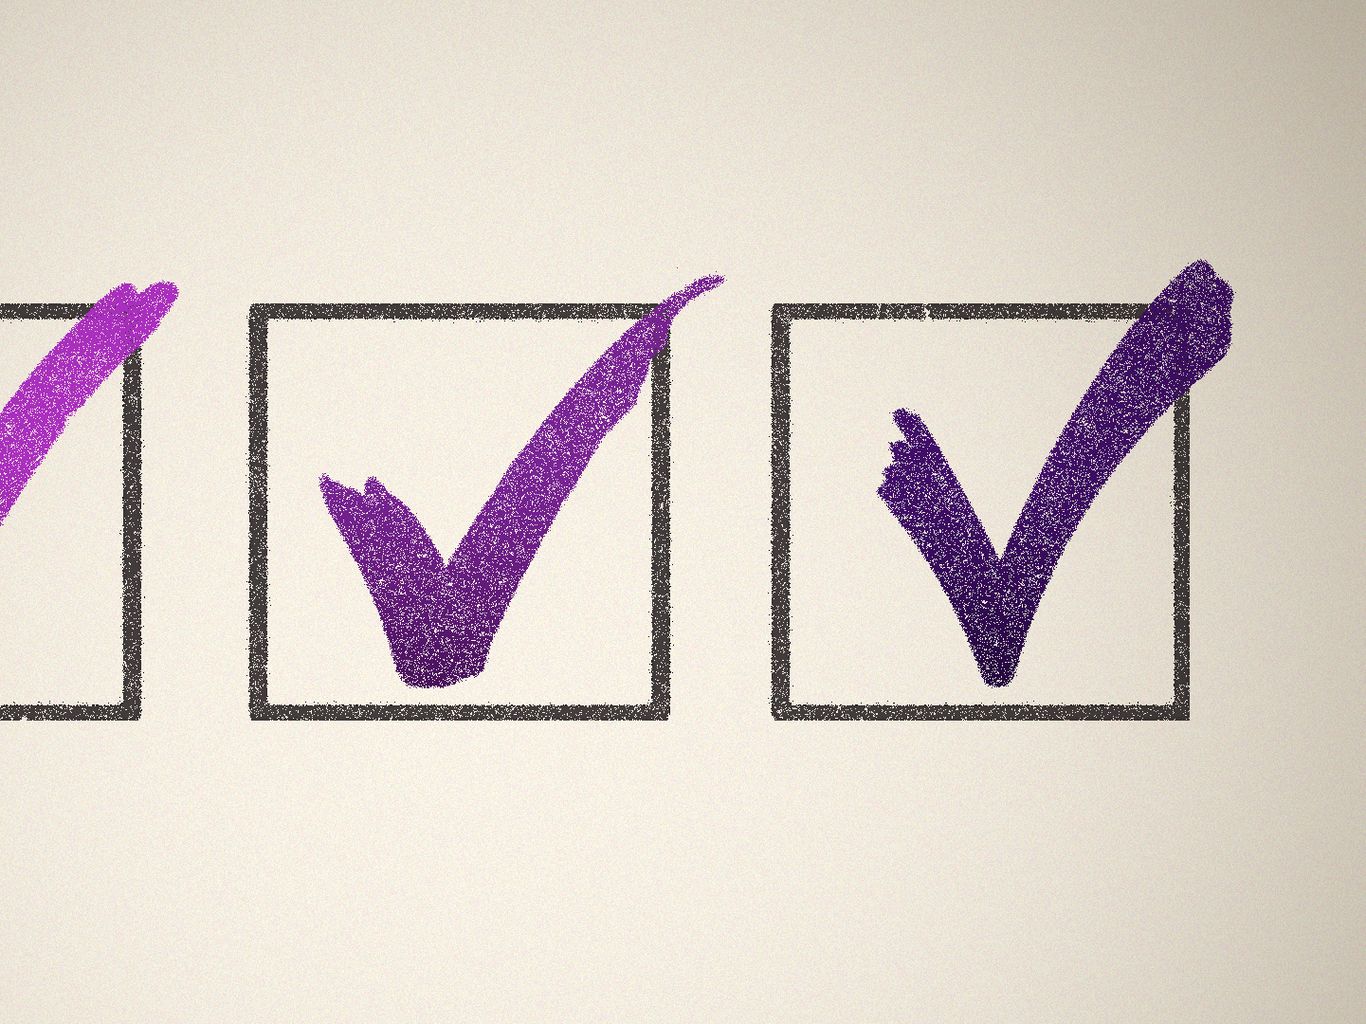 Ranked Choice Voting in AZ: How it works and how it could change